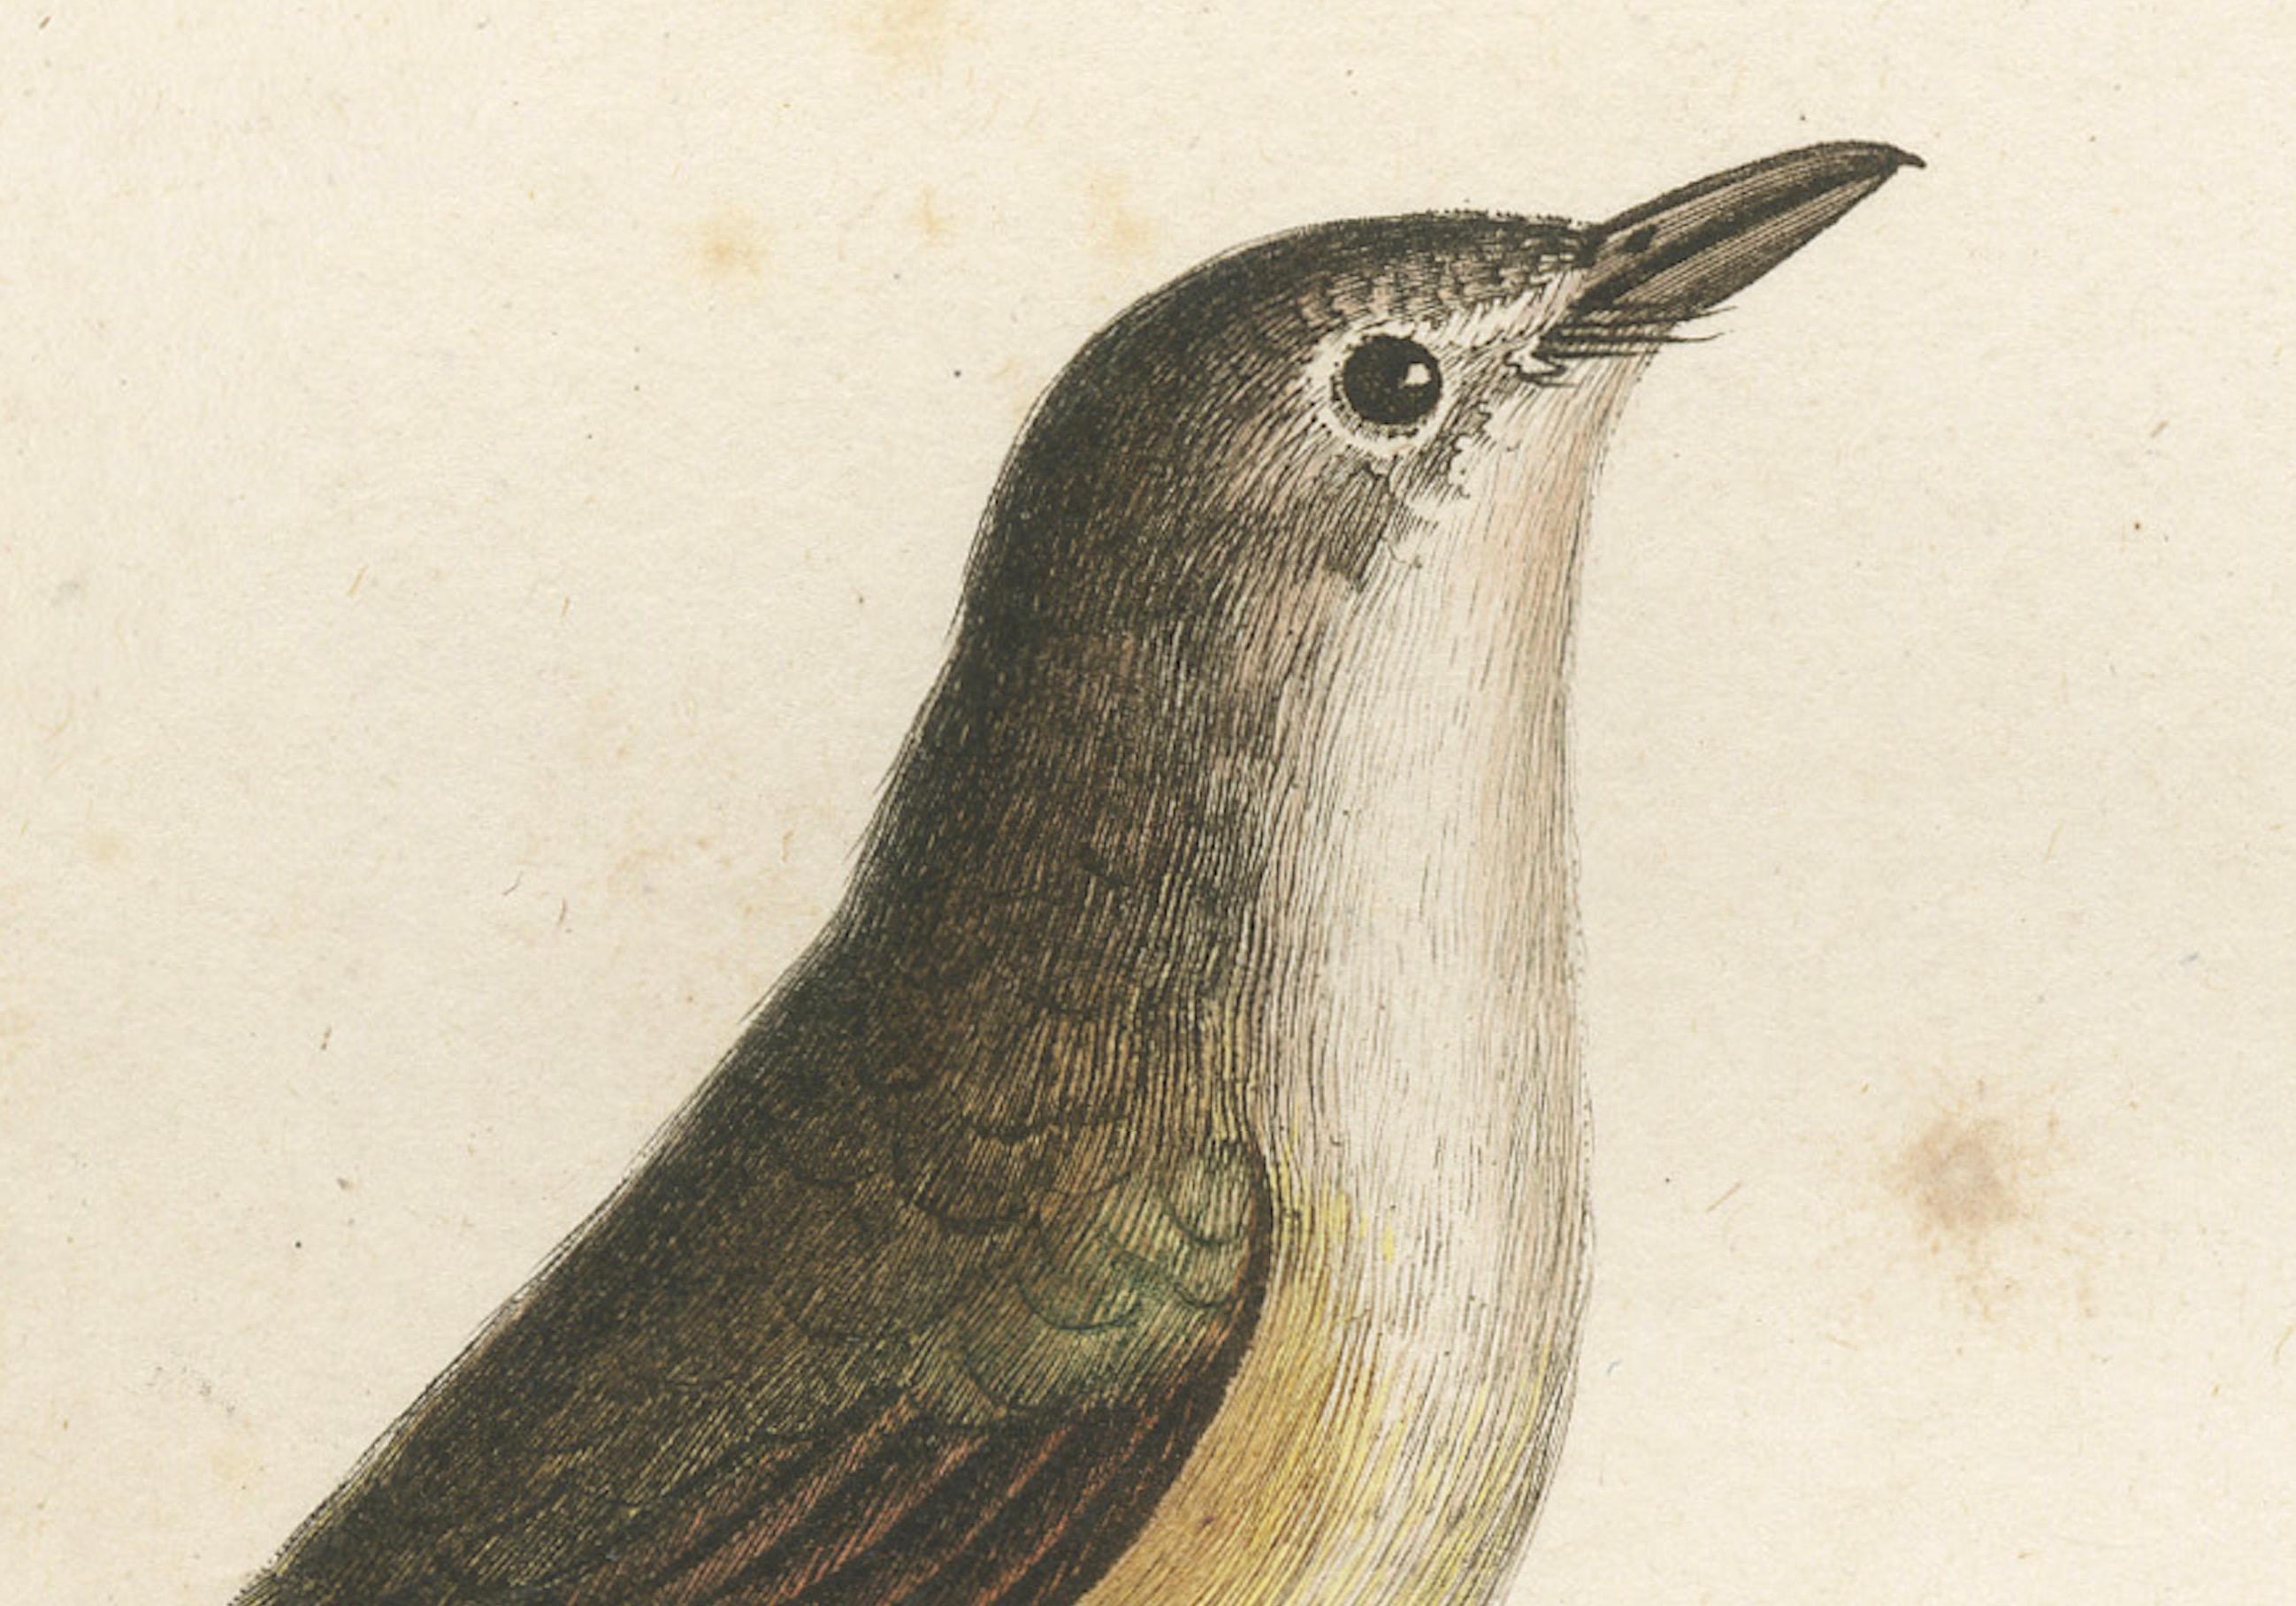 This handcolored antique print, titled 'Le Moucherolle doré', presents a portrayal of a flycatcher species, possibly the white golden flycatcher. The bird is depicted perched gracefully on a tree branch, turned slightly to its left, allowing a clear